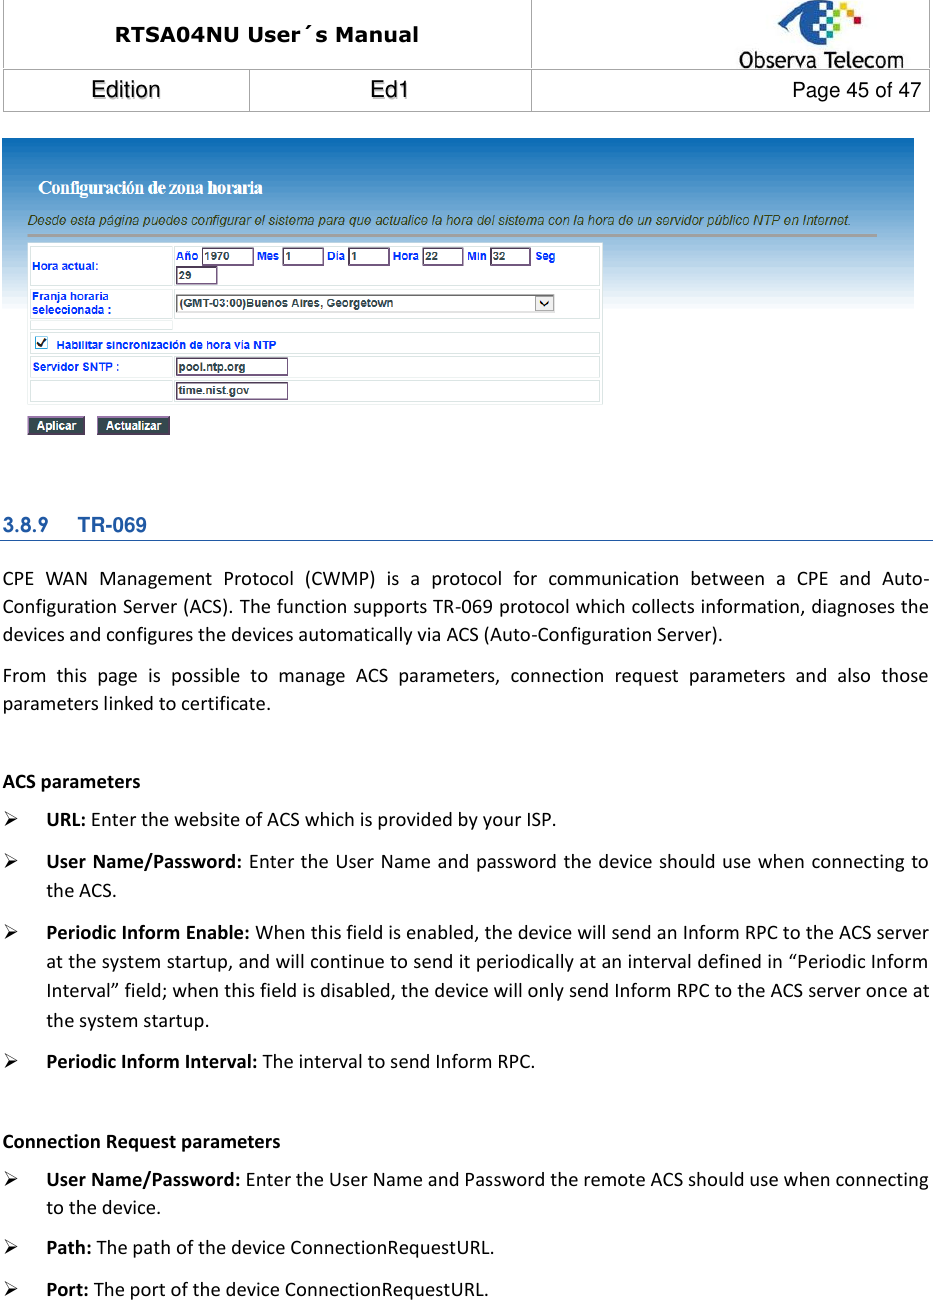 RTSA04NU User´s Manual  EEddiittiioonn  EEdd11  Page 45 of 47    3.8.9 TR-069 CPE  WAN  Management  Protocol  (CWMP)  is  a  protocol  for  communication  between  a  CPE  and  Auto-Configuration Server (ACS). The function supports TR-069 protocol which collects information, diagnoses the devices and configures the devices automatically via ACS (Auto-Configuration Server). From  this  page  is  possible  to  manage  ACS  parameters,  connection  request  parameters  and  also  those parameters linked to certificate.  ACS parameters  URL: Enter the website of ACS which is provided by your ISP.  User Name/Password: Enter the User Name and password the device should use when connecting to the ACS.  Periodic Inform Enable: When this field is enabled, the device will send an Inform RPC to the ACS server at the system startup, and will continue to send it periodically at an interval defined in “Periodic Inform Interval” field; when this field is disabled, the device will only send Inform RPC to the ACS server once at the system startup.  Periodic Inform Interval: The interval to send Inform RPC.  Connection Request parameters  User Name/Password: Enter the User Name and Password the remote ACS should use when connecting to the device.  Path: The path of the device ConnectionRequestURL.  Port: The port of the device ConnectionRequestURL. 